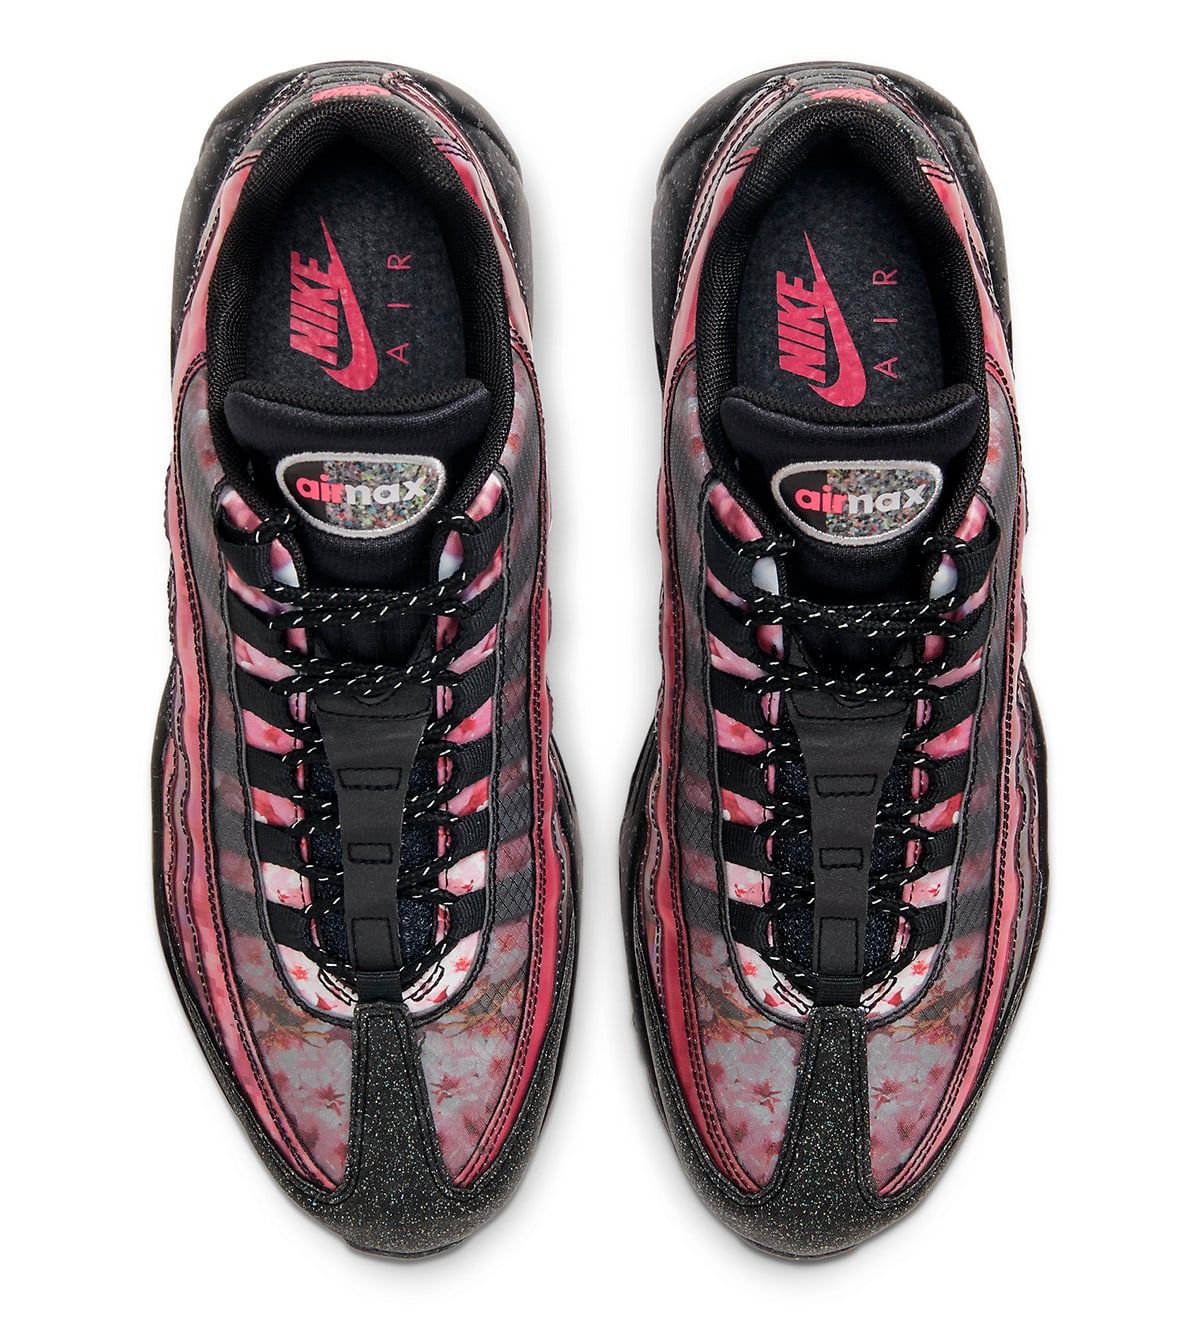 The Air Max 95 “Cherry Blossom” Boasts Blooming Prints and Pixelated Panels  | House of Heat°